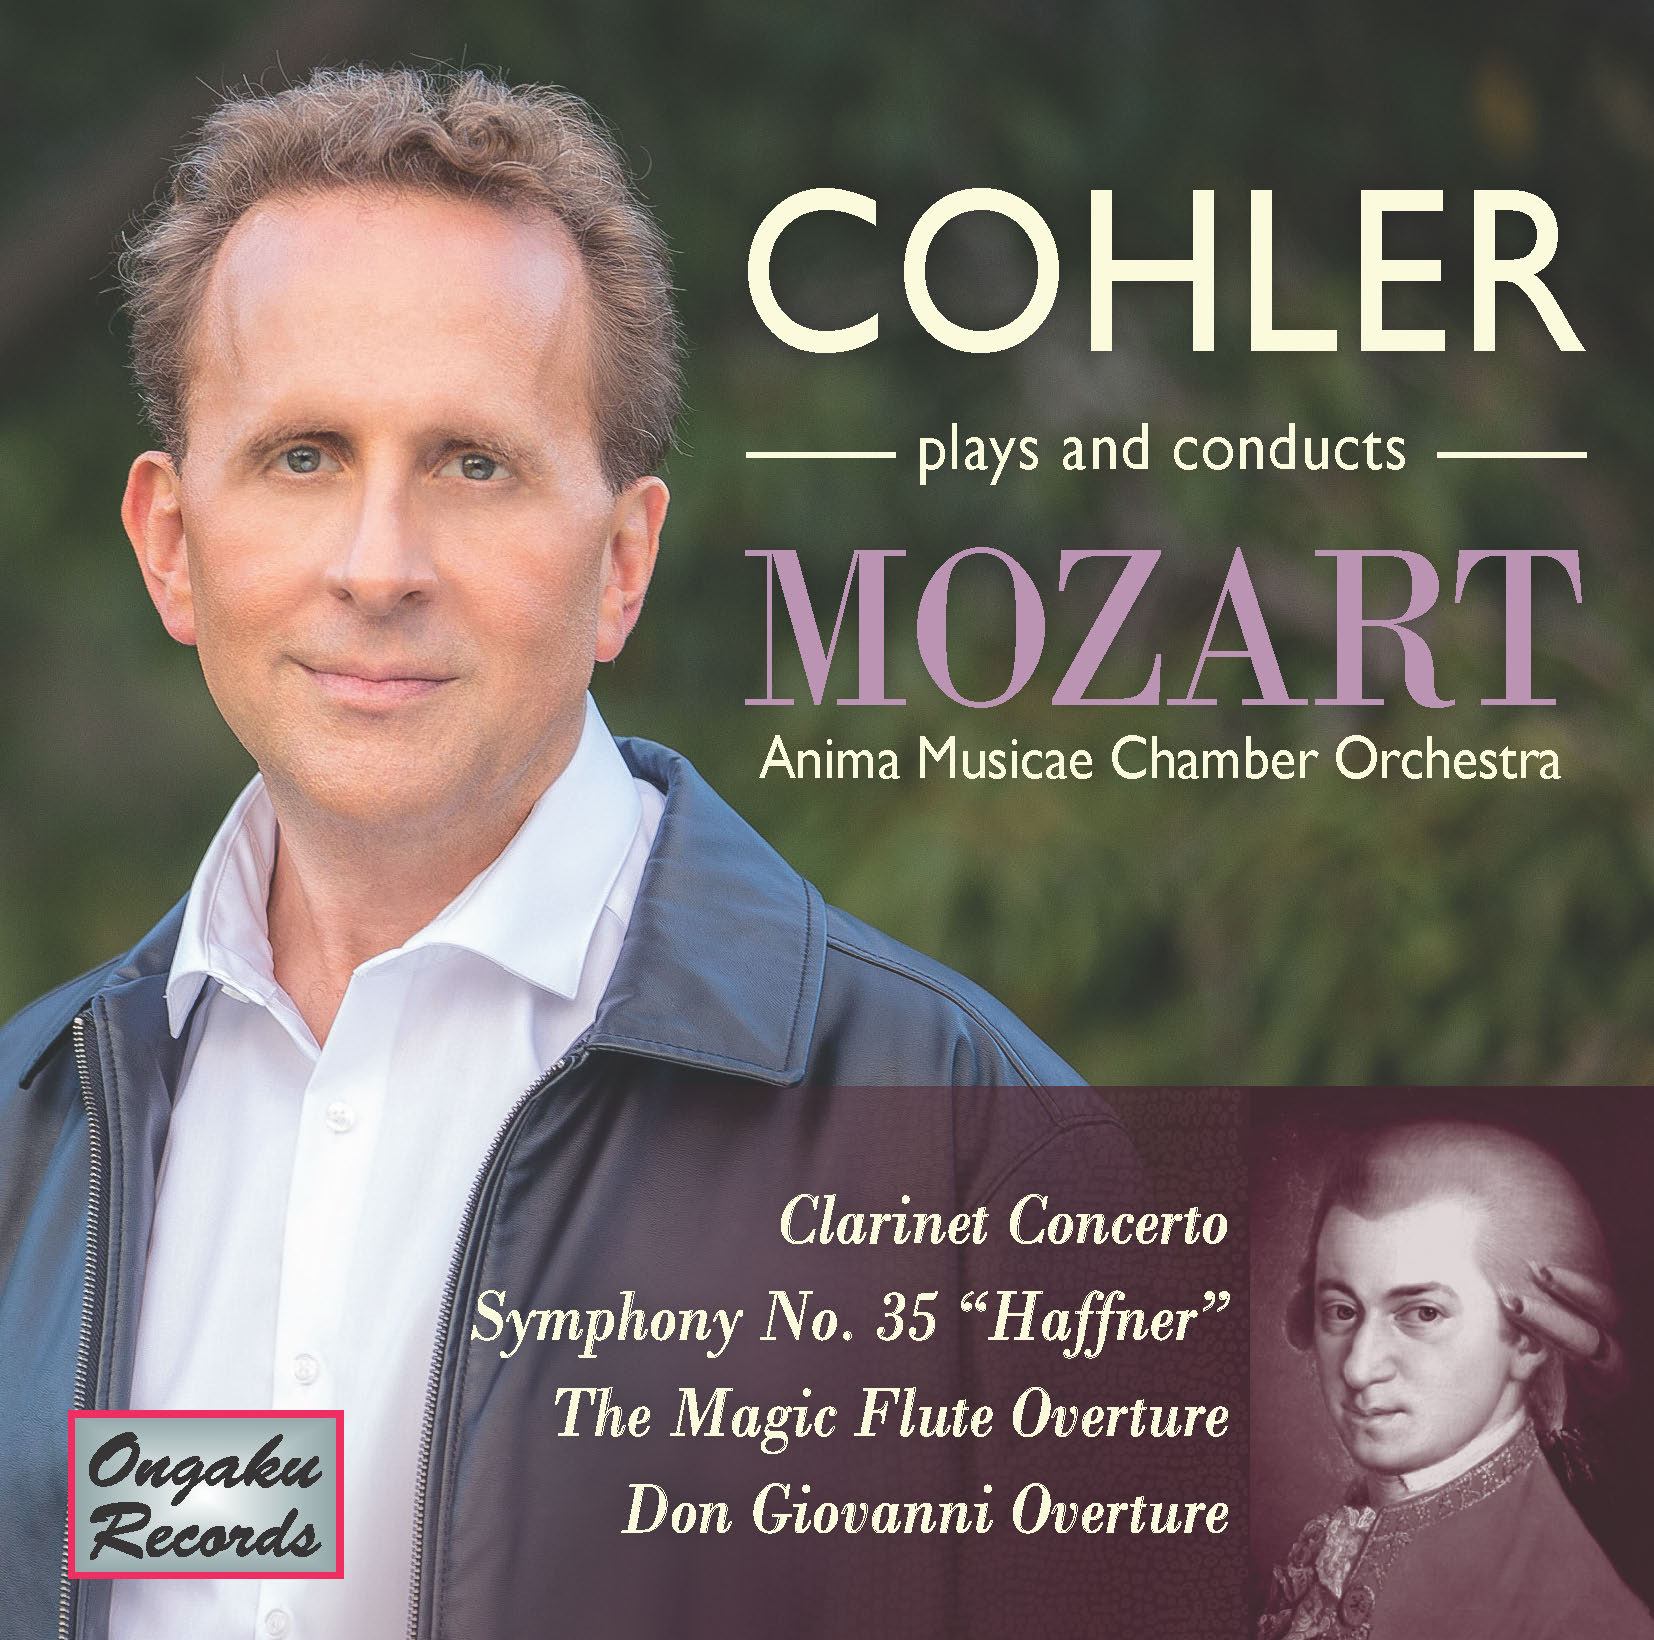 Cohler plays and conducts Mozart